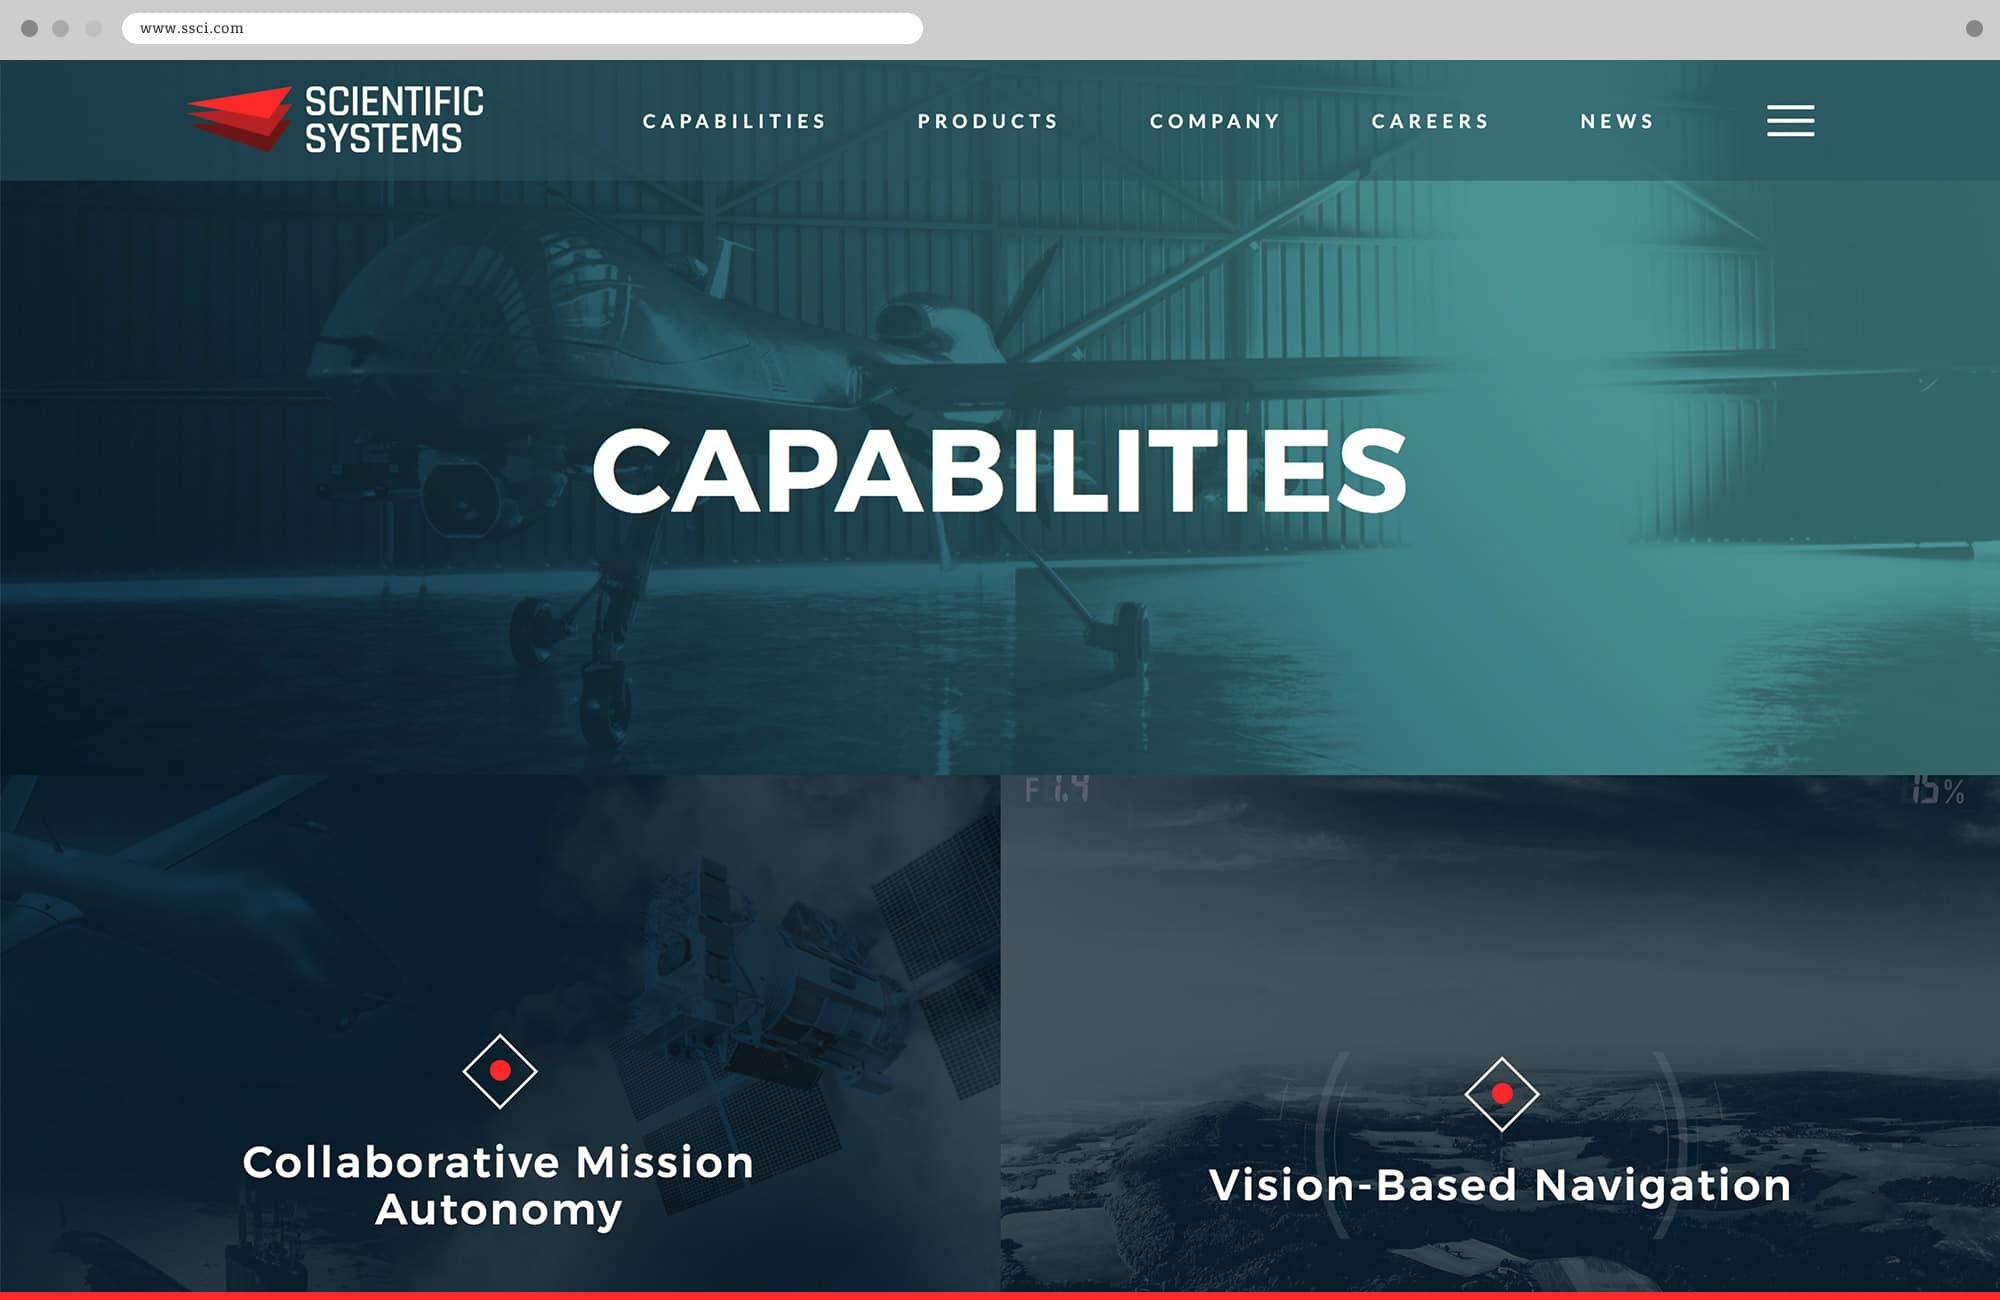 Punch - SSCI Capabilities Page